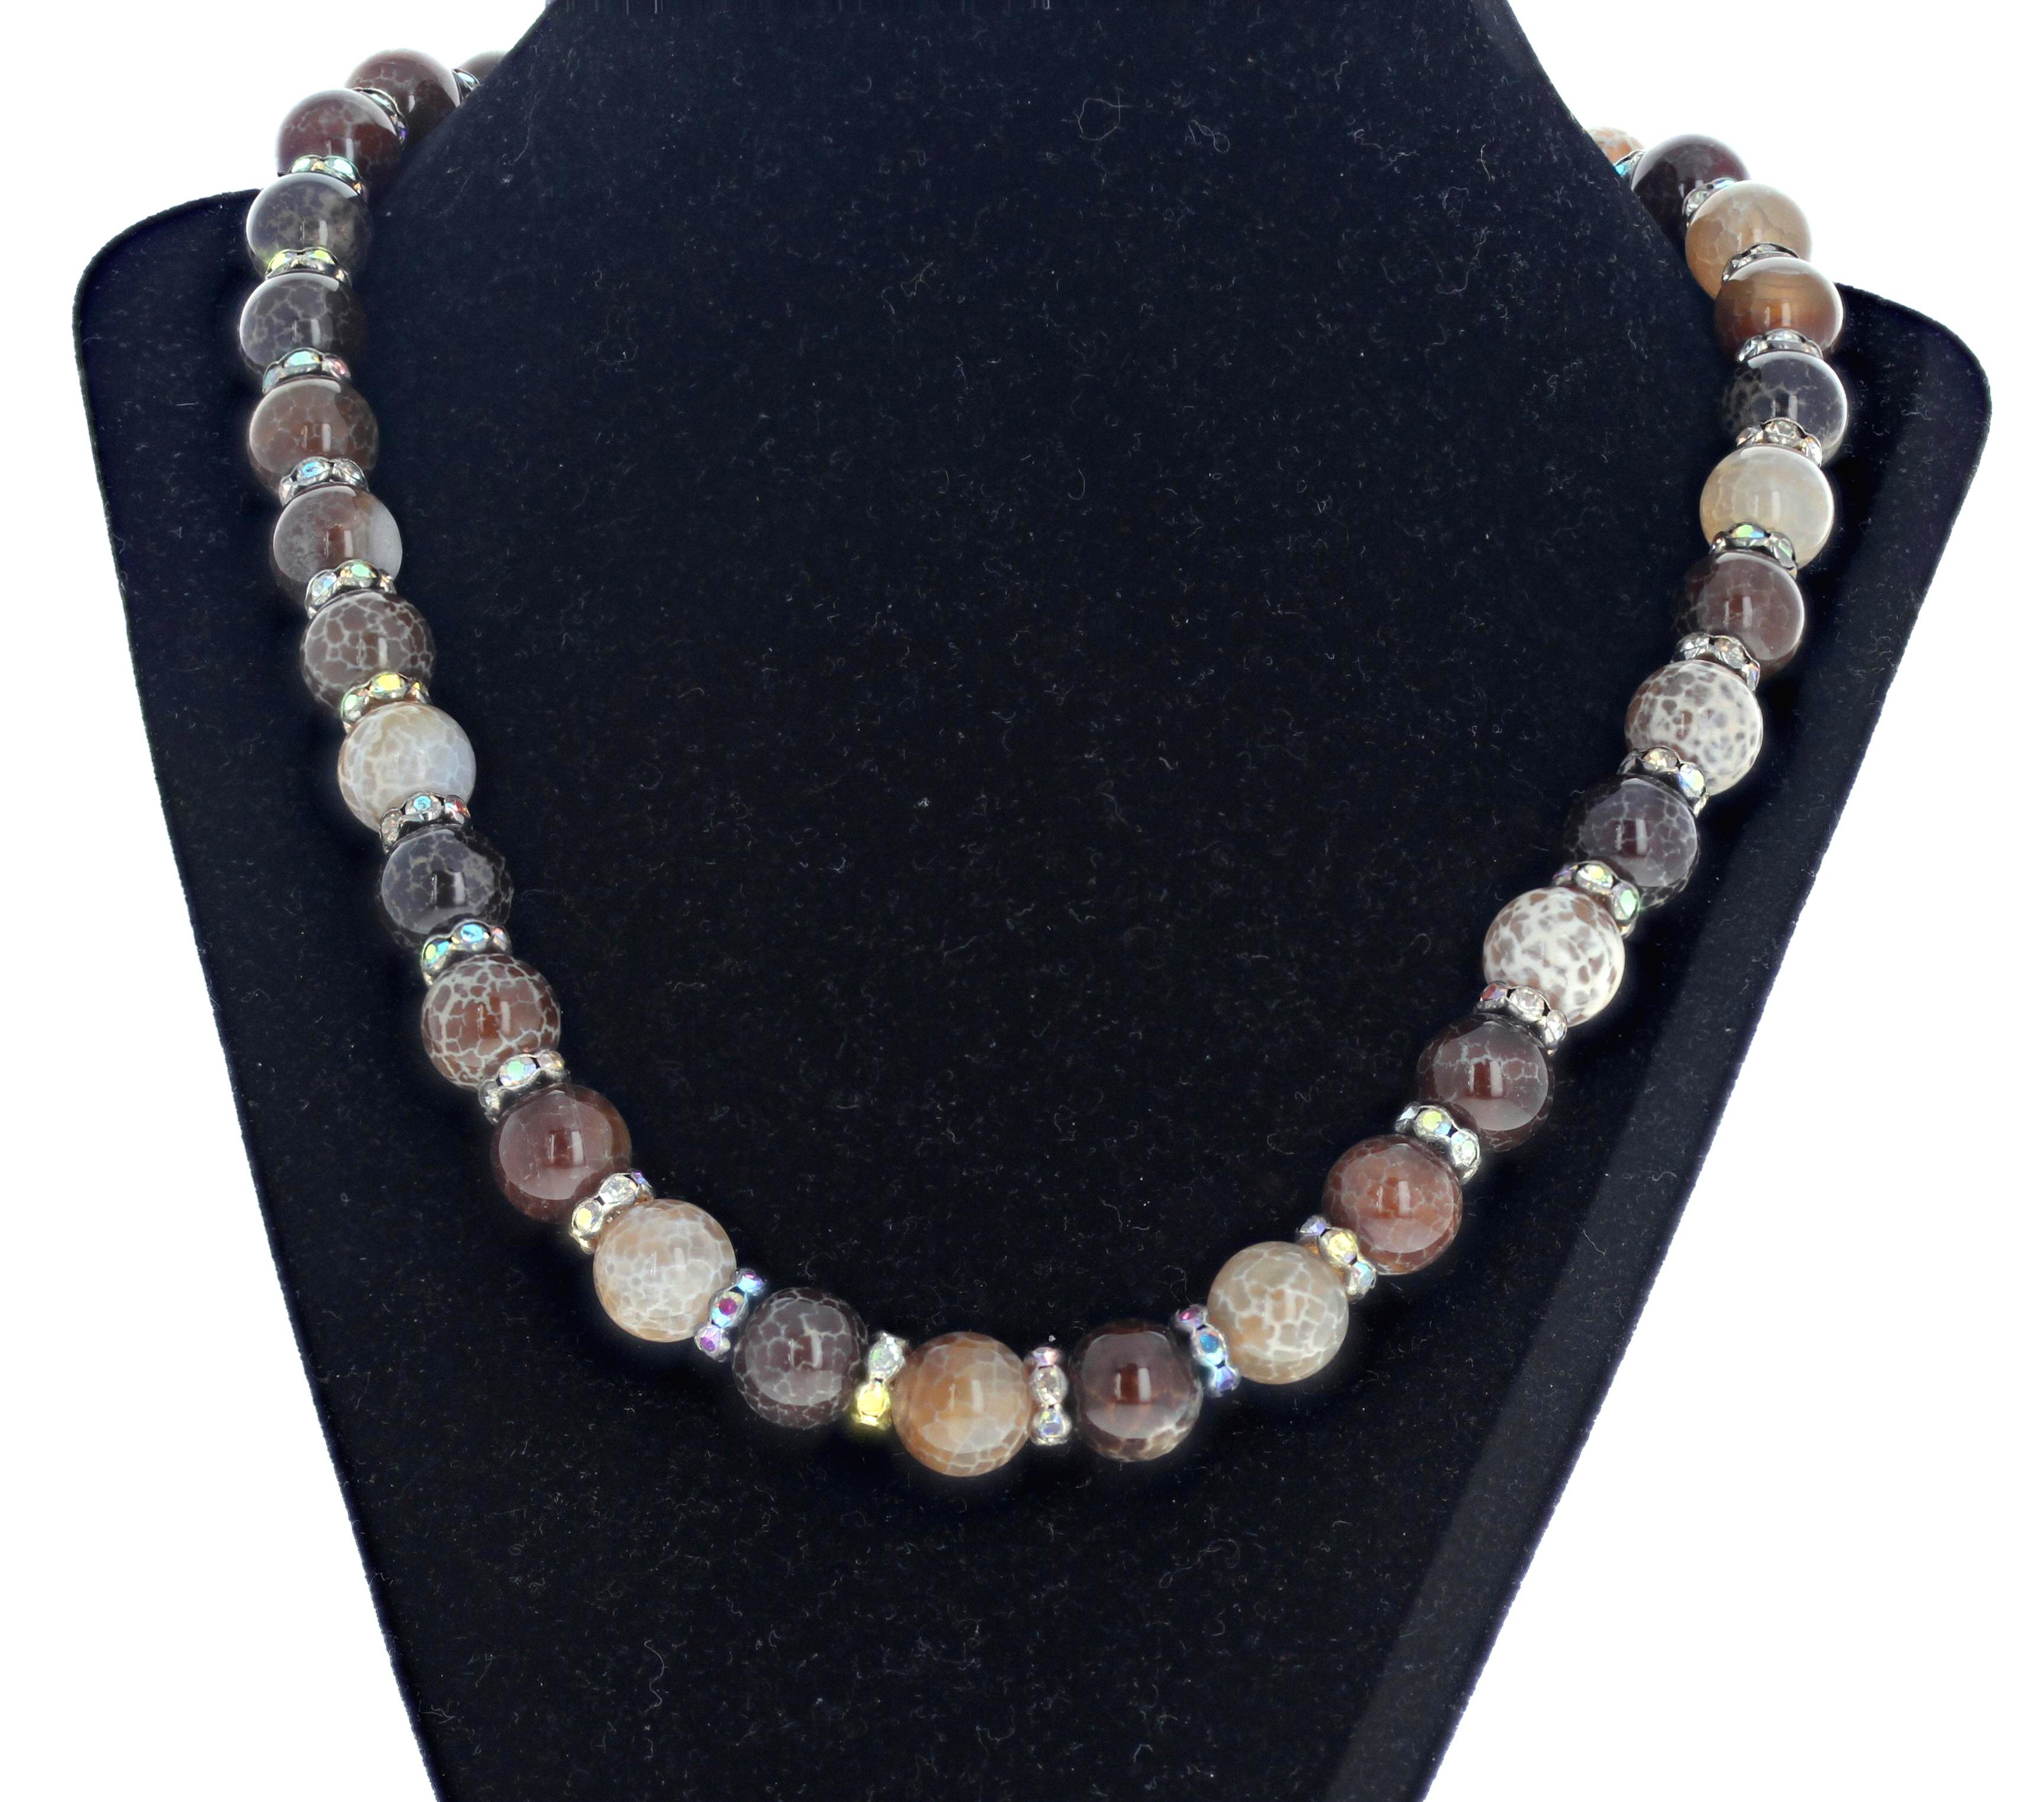 This 20 inch long necklace of Natural Agates is enhanced with sparkling spacers that intensify the beauty of the Agates.  The highly polished Agates are approximately 12mm.  The clasp is an easy to us silvery Toggle clasp.  